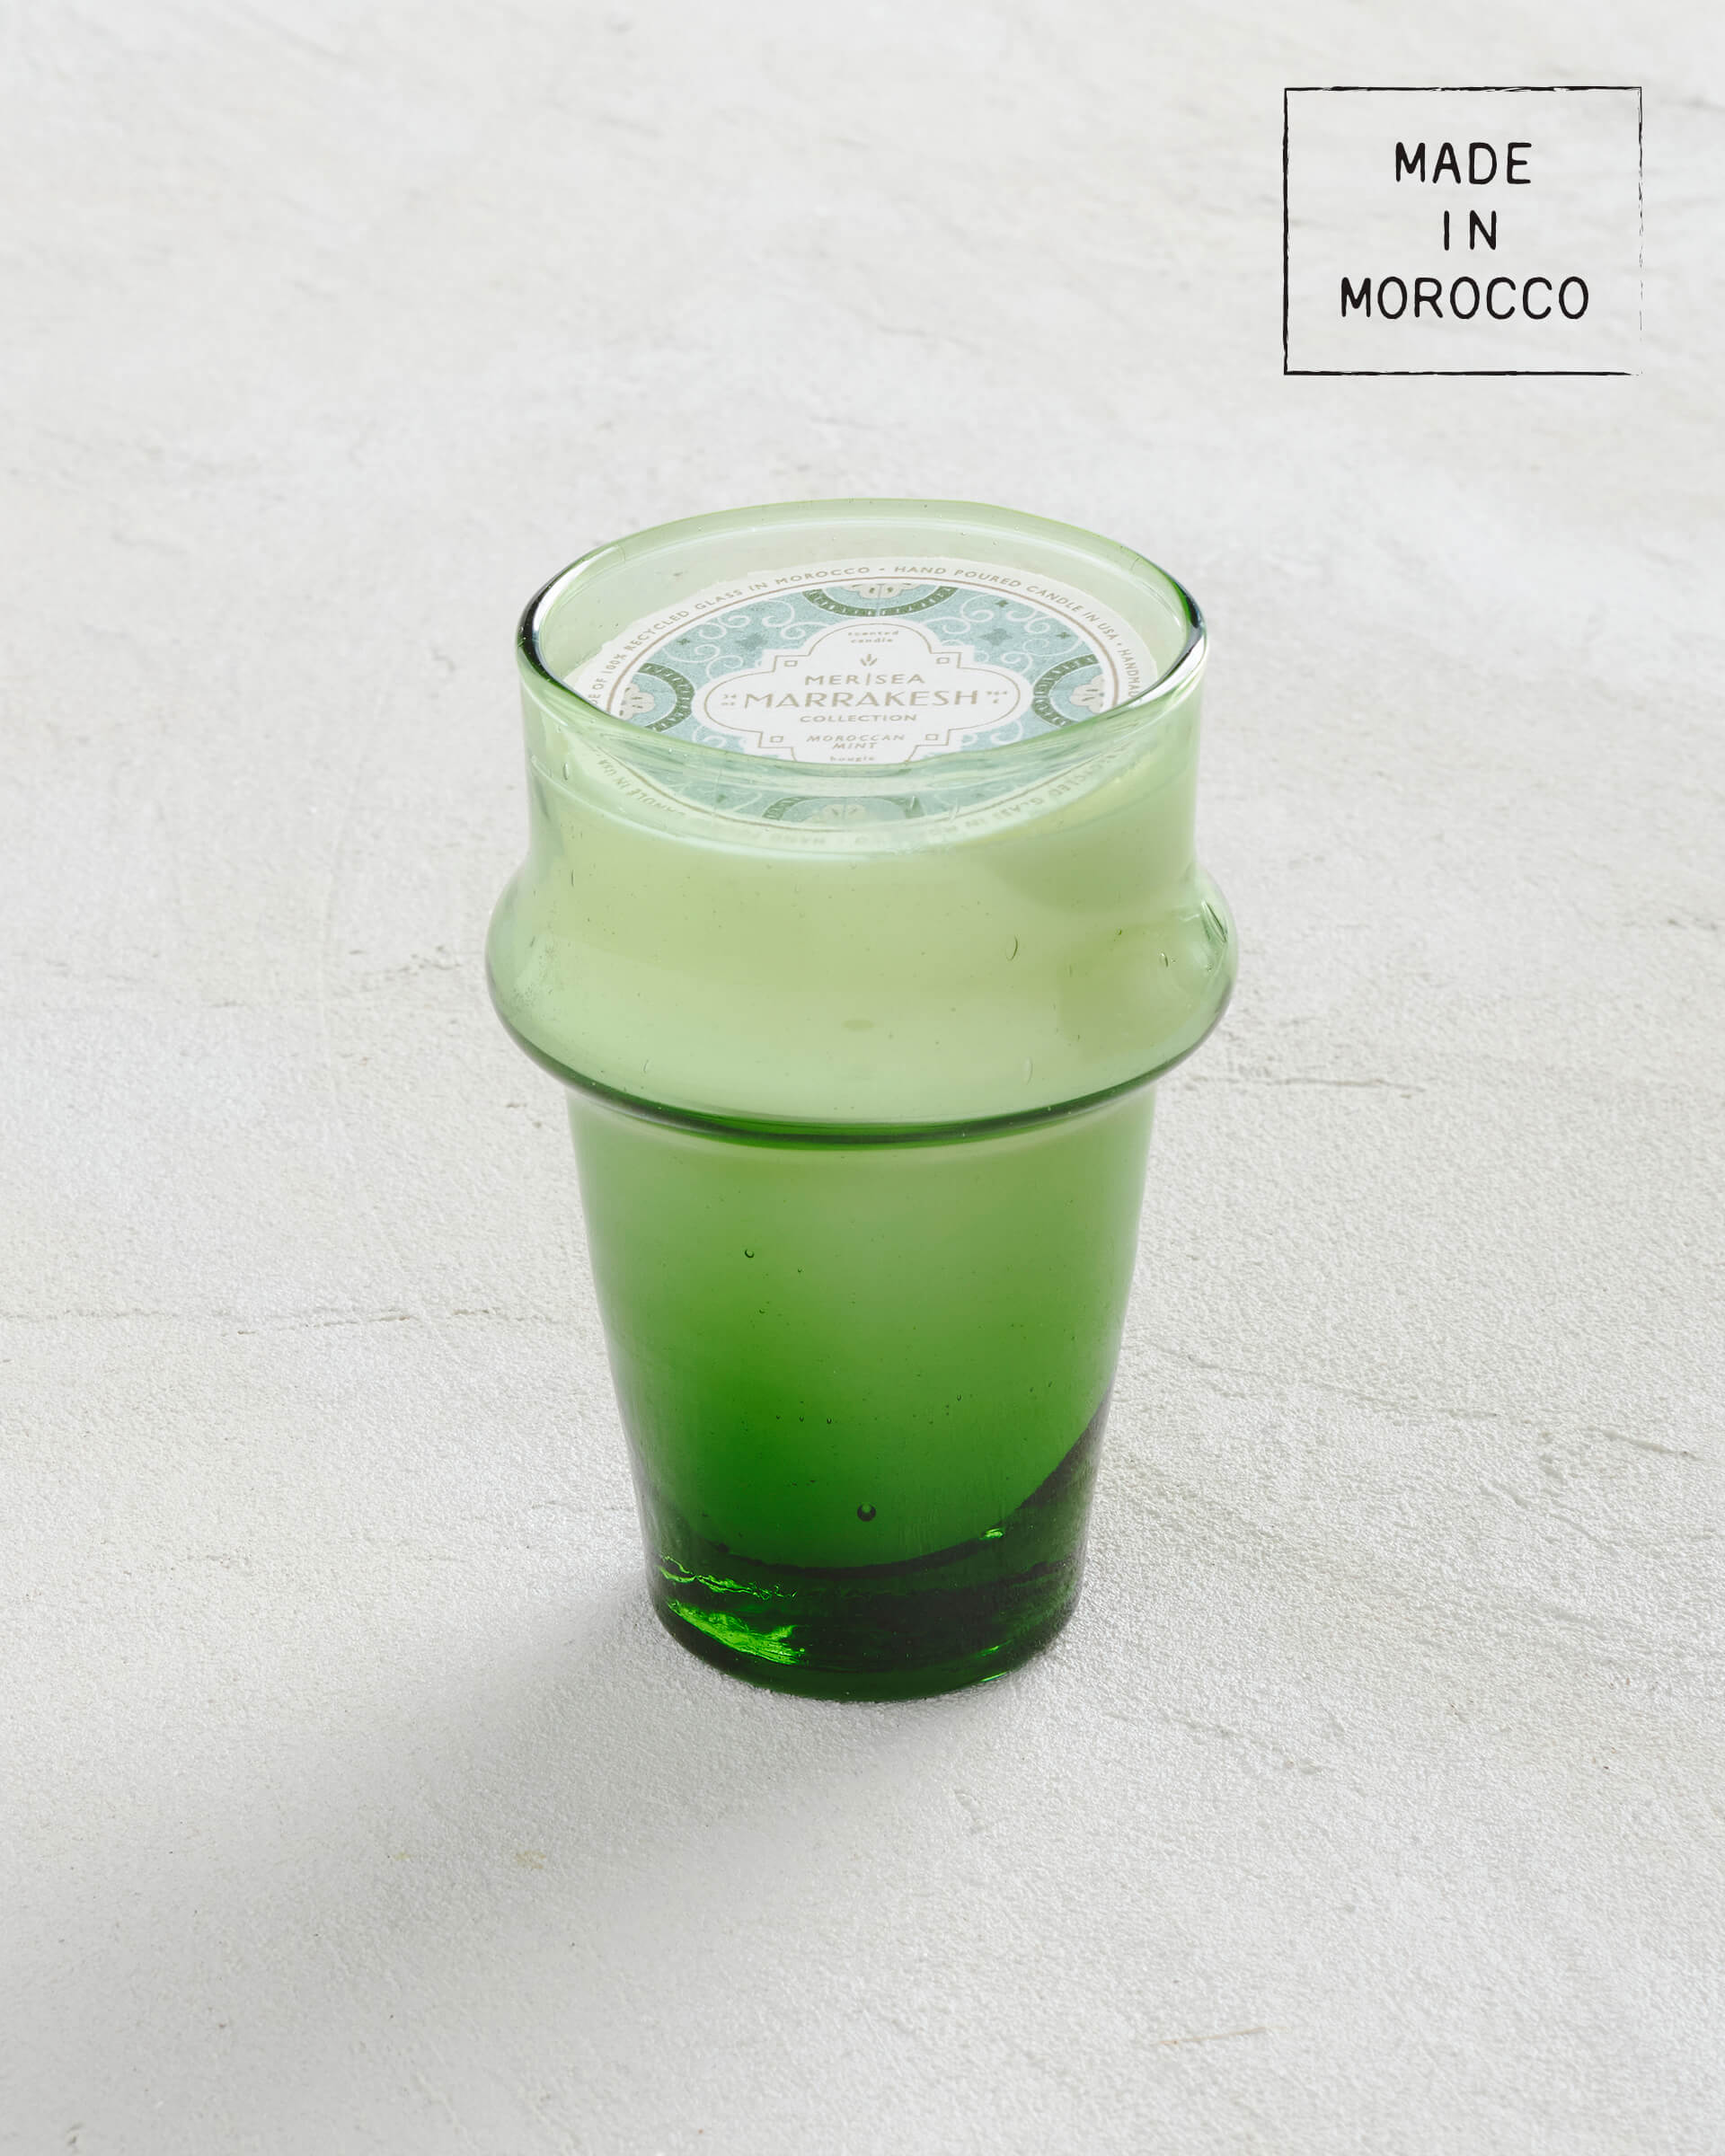 tall green glass moroccan mint candle sitting on a white background made in morocco 